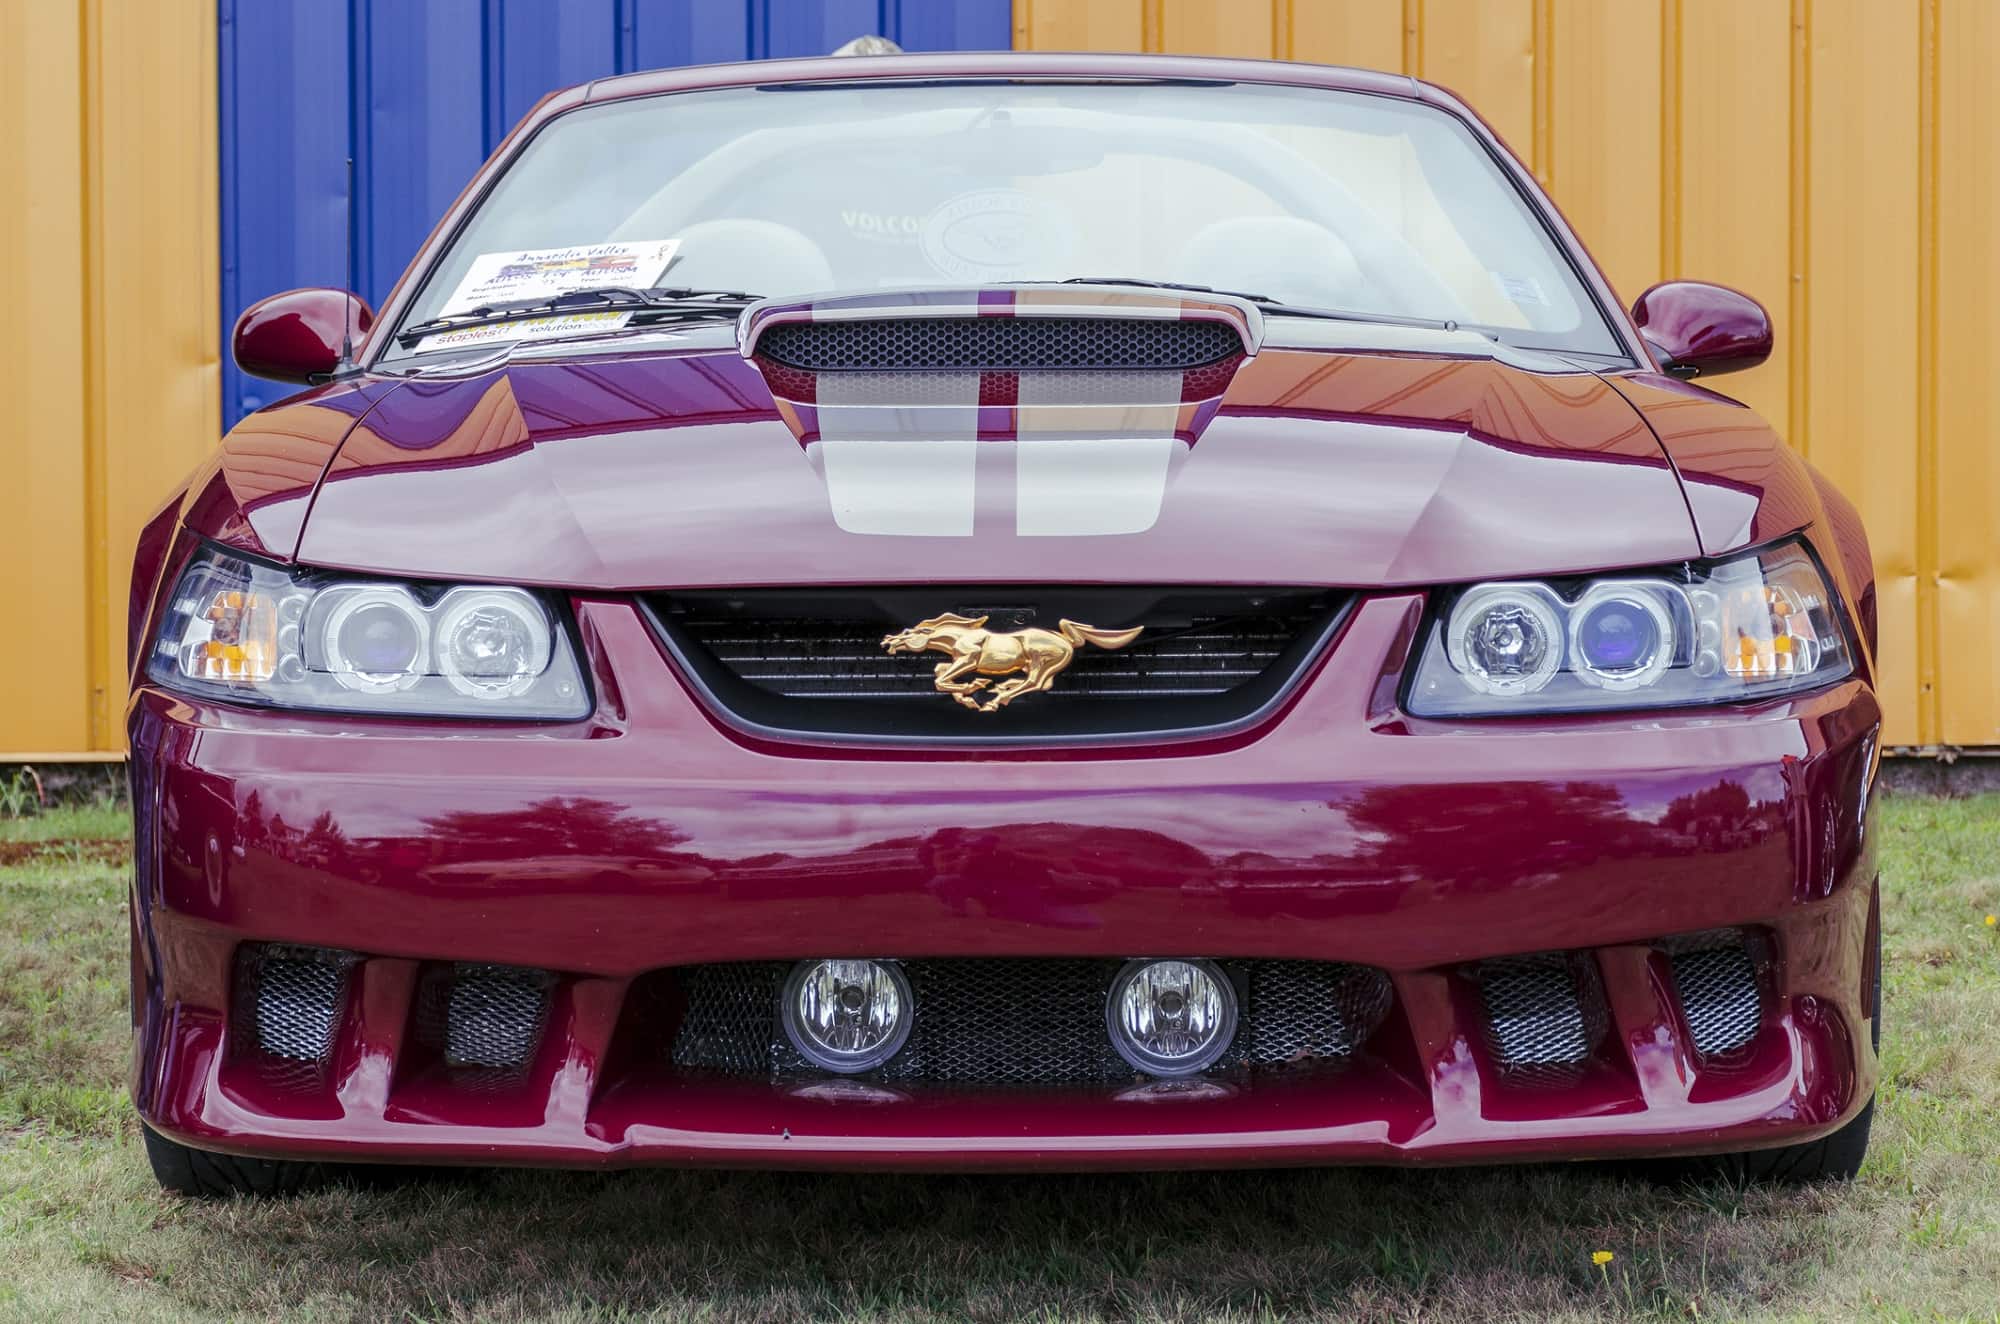 4R70W Transmission-Swapped Fourth-Gen Mustang? - Gearstar